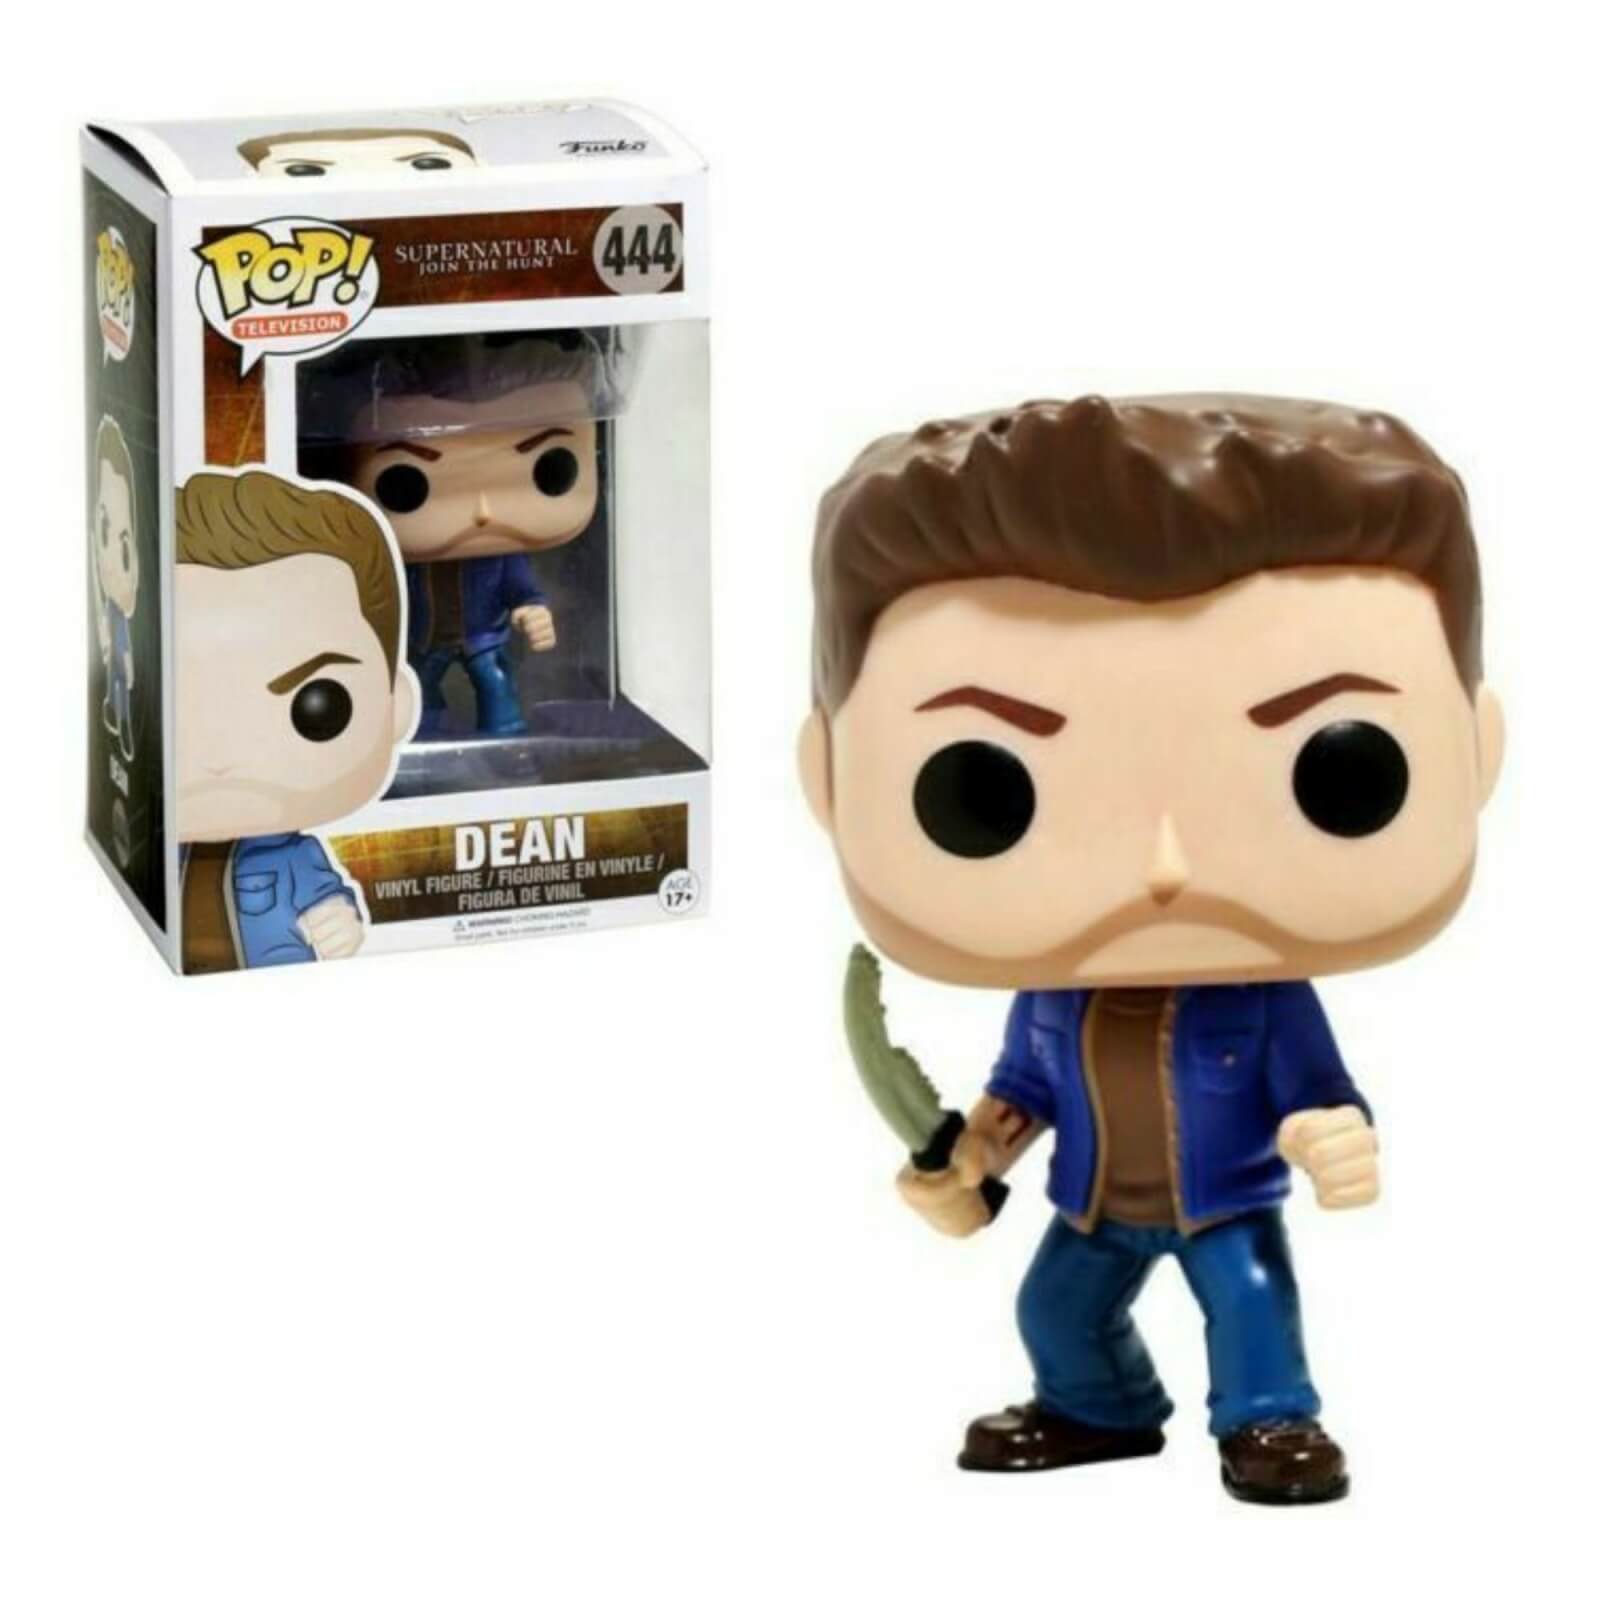 Supernatural Dean with First Blade & Mark of Cain EXC Funko Pop! Vinyl